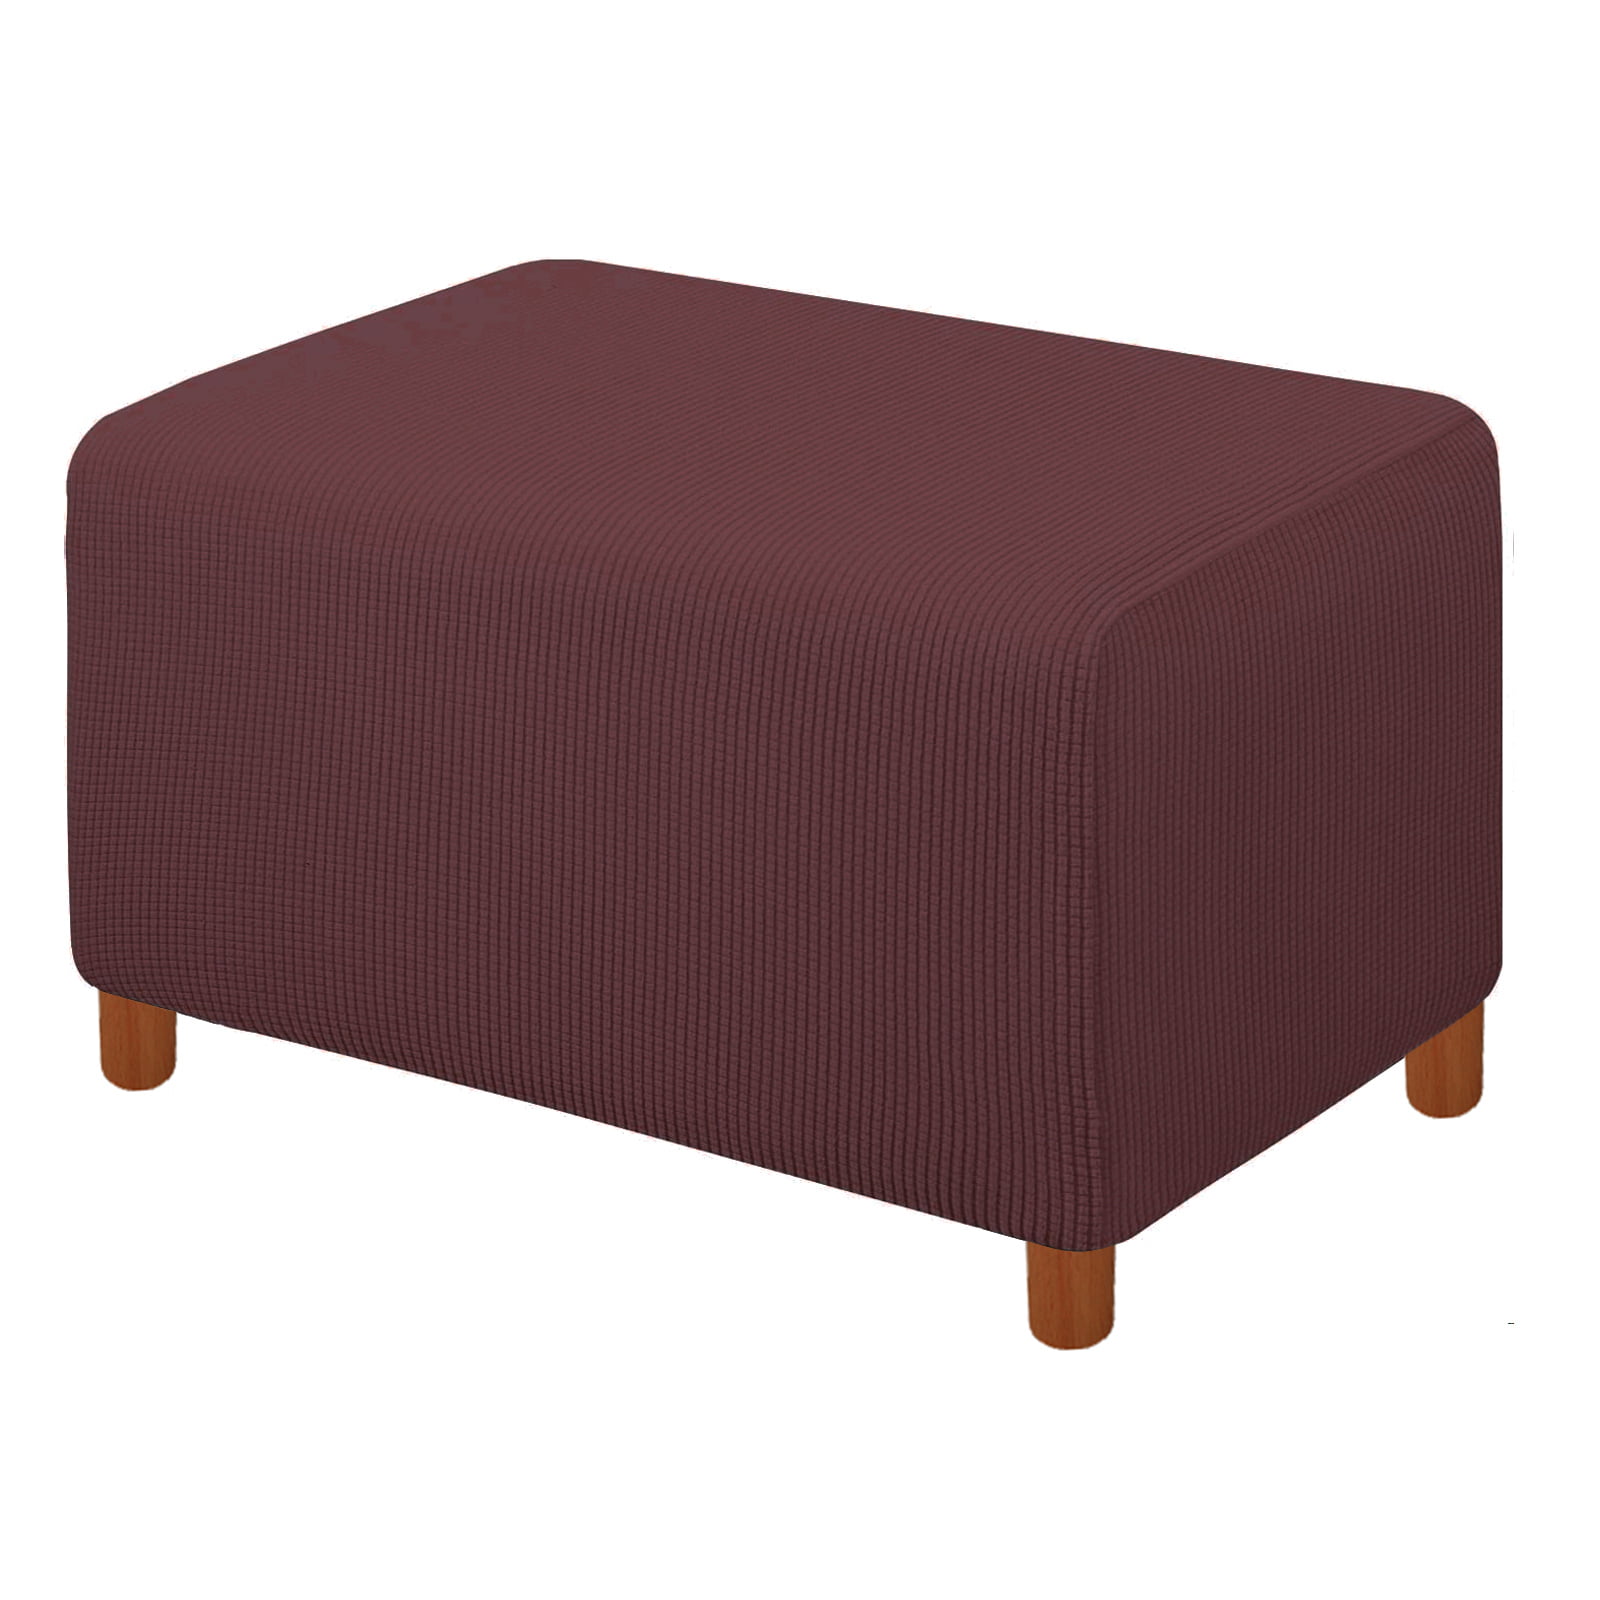 Details about   Ottoman Slipcover Living Room Footstool Cover Stretch Elastic Rectangle Soft